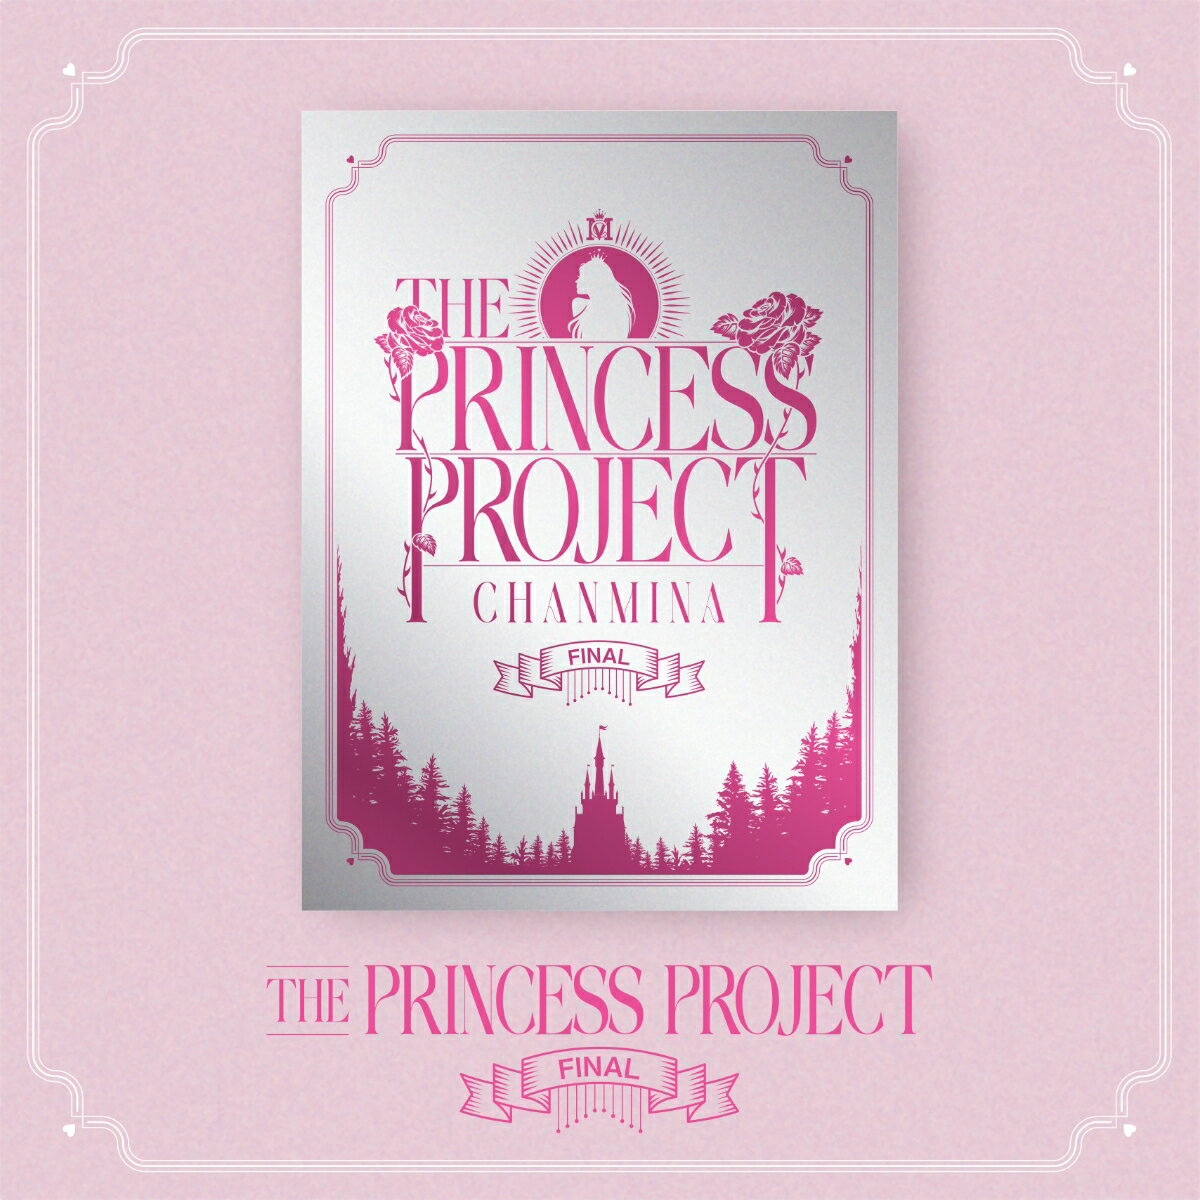 THE PRINCESS PROJECT - FINAL -(1DVD) [ ちゃんみな ]